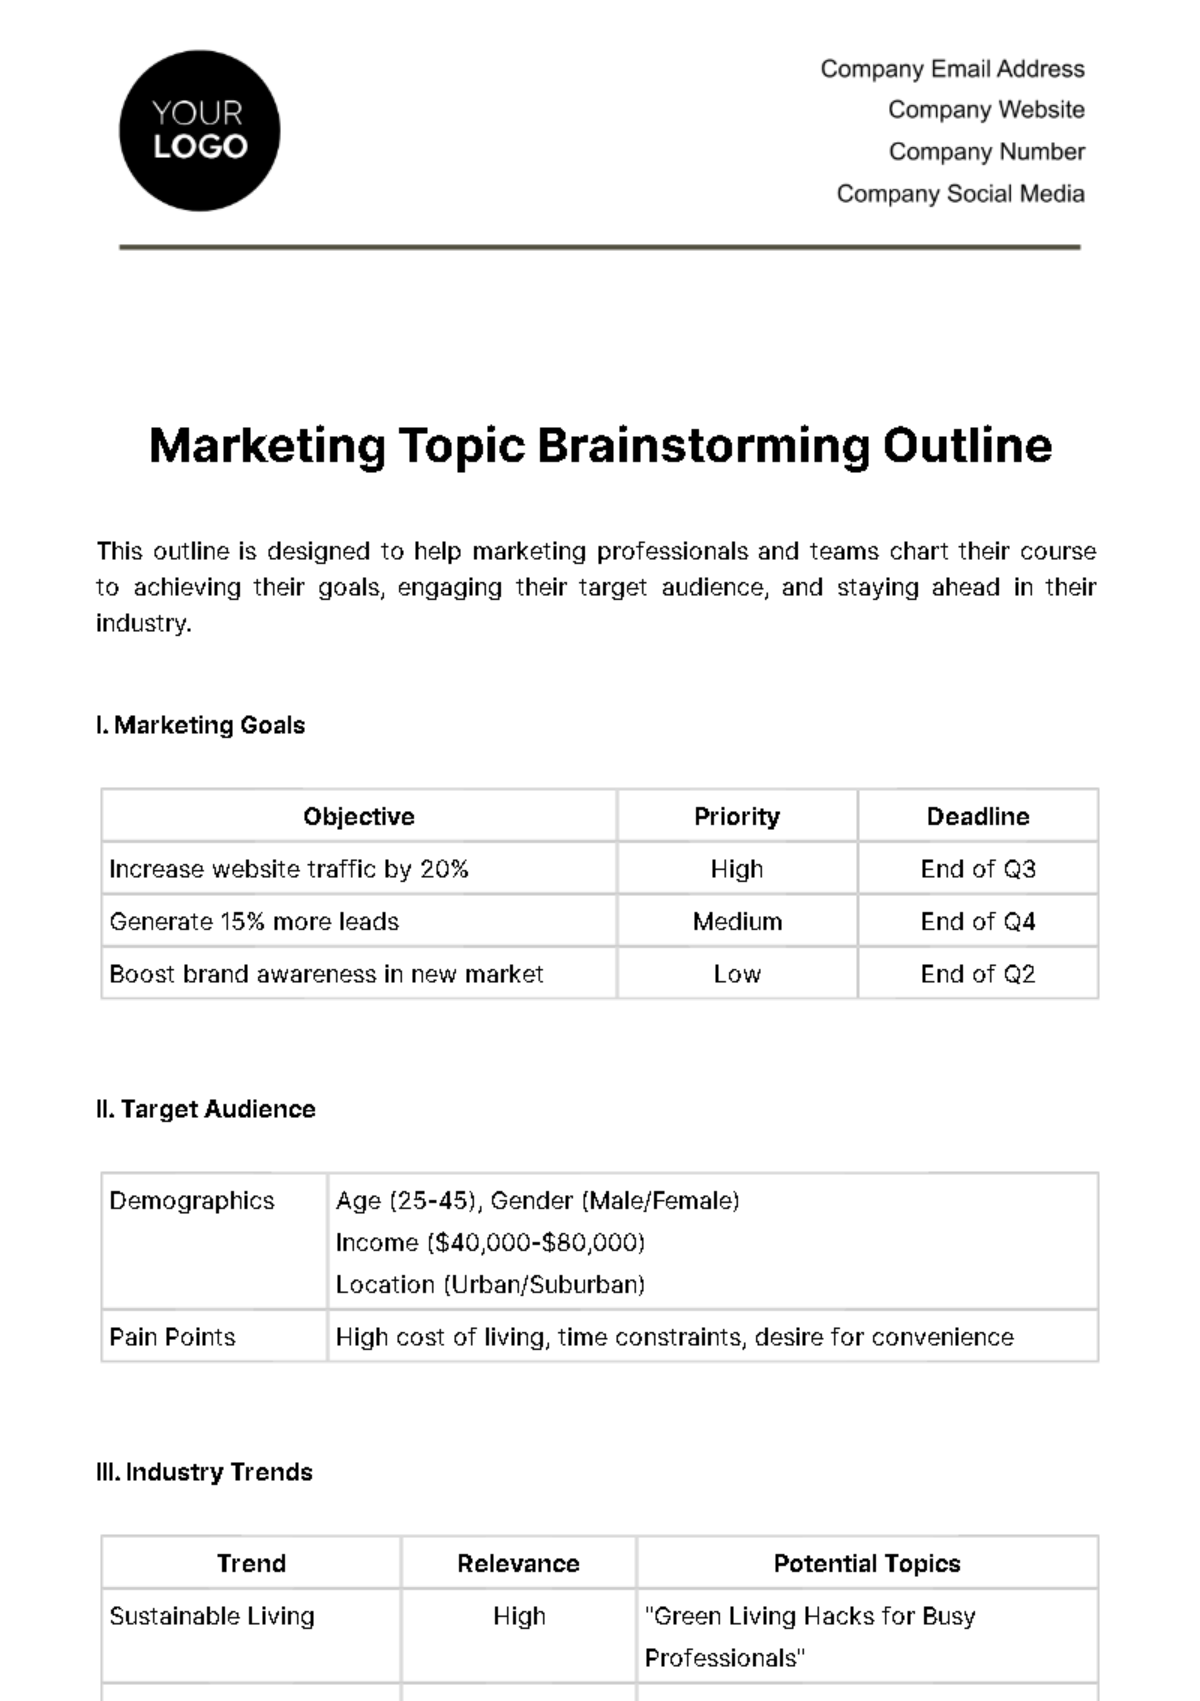 Free Marketing Topic Brainstorming Outline Template